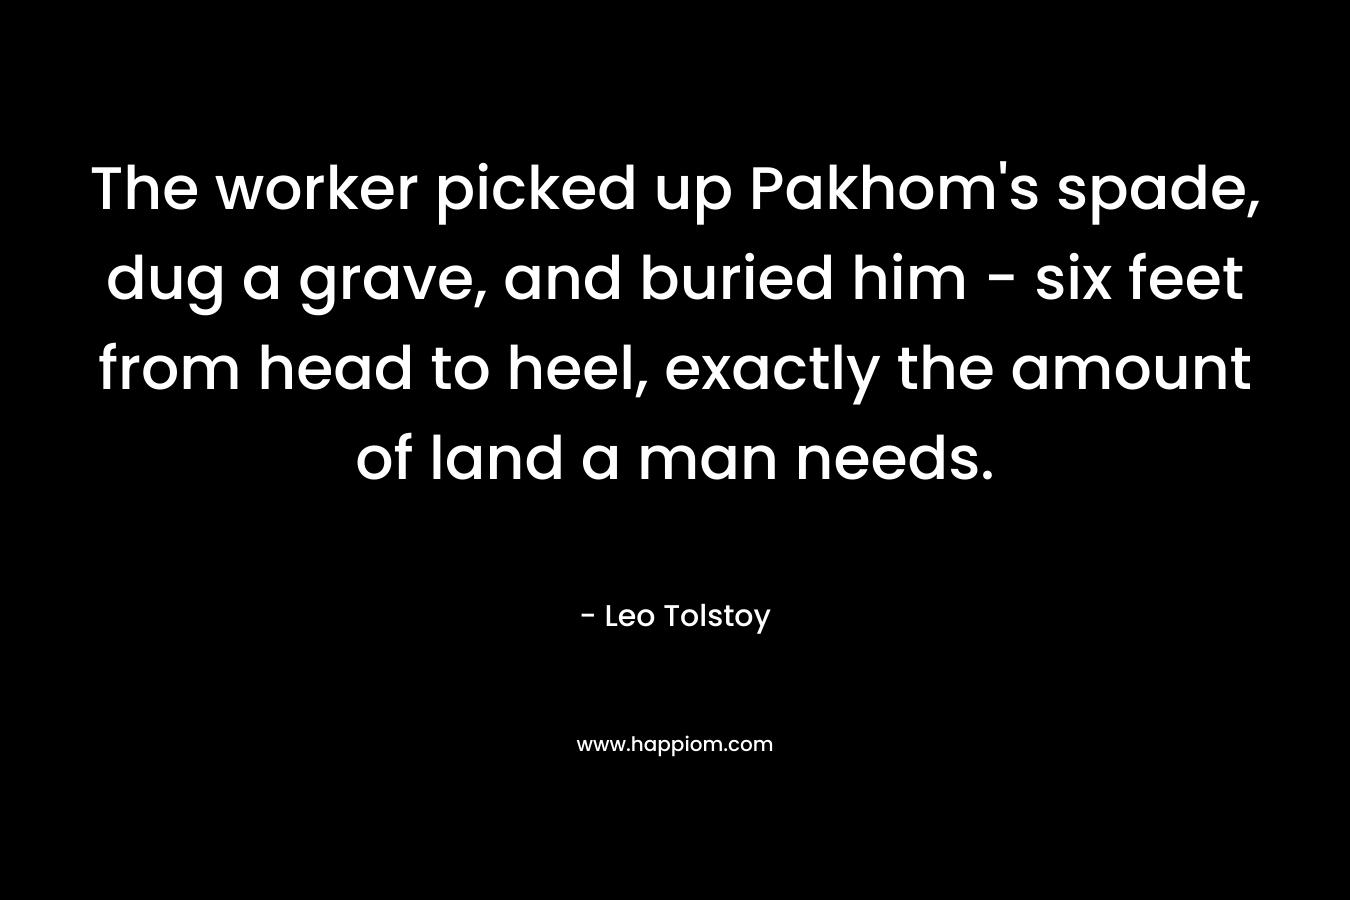 The worker picked up Pakhom's spade, dug a grave, and buried him - six feet from head to heel, exactly the amount of land a man needs.